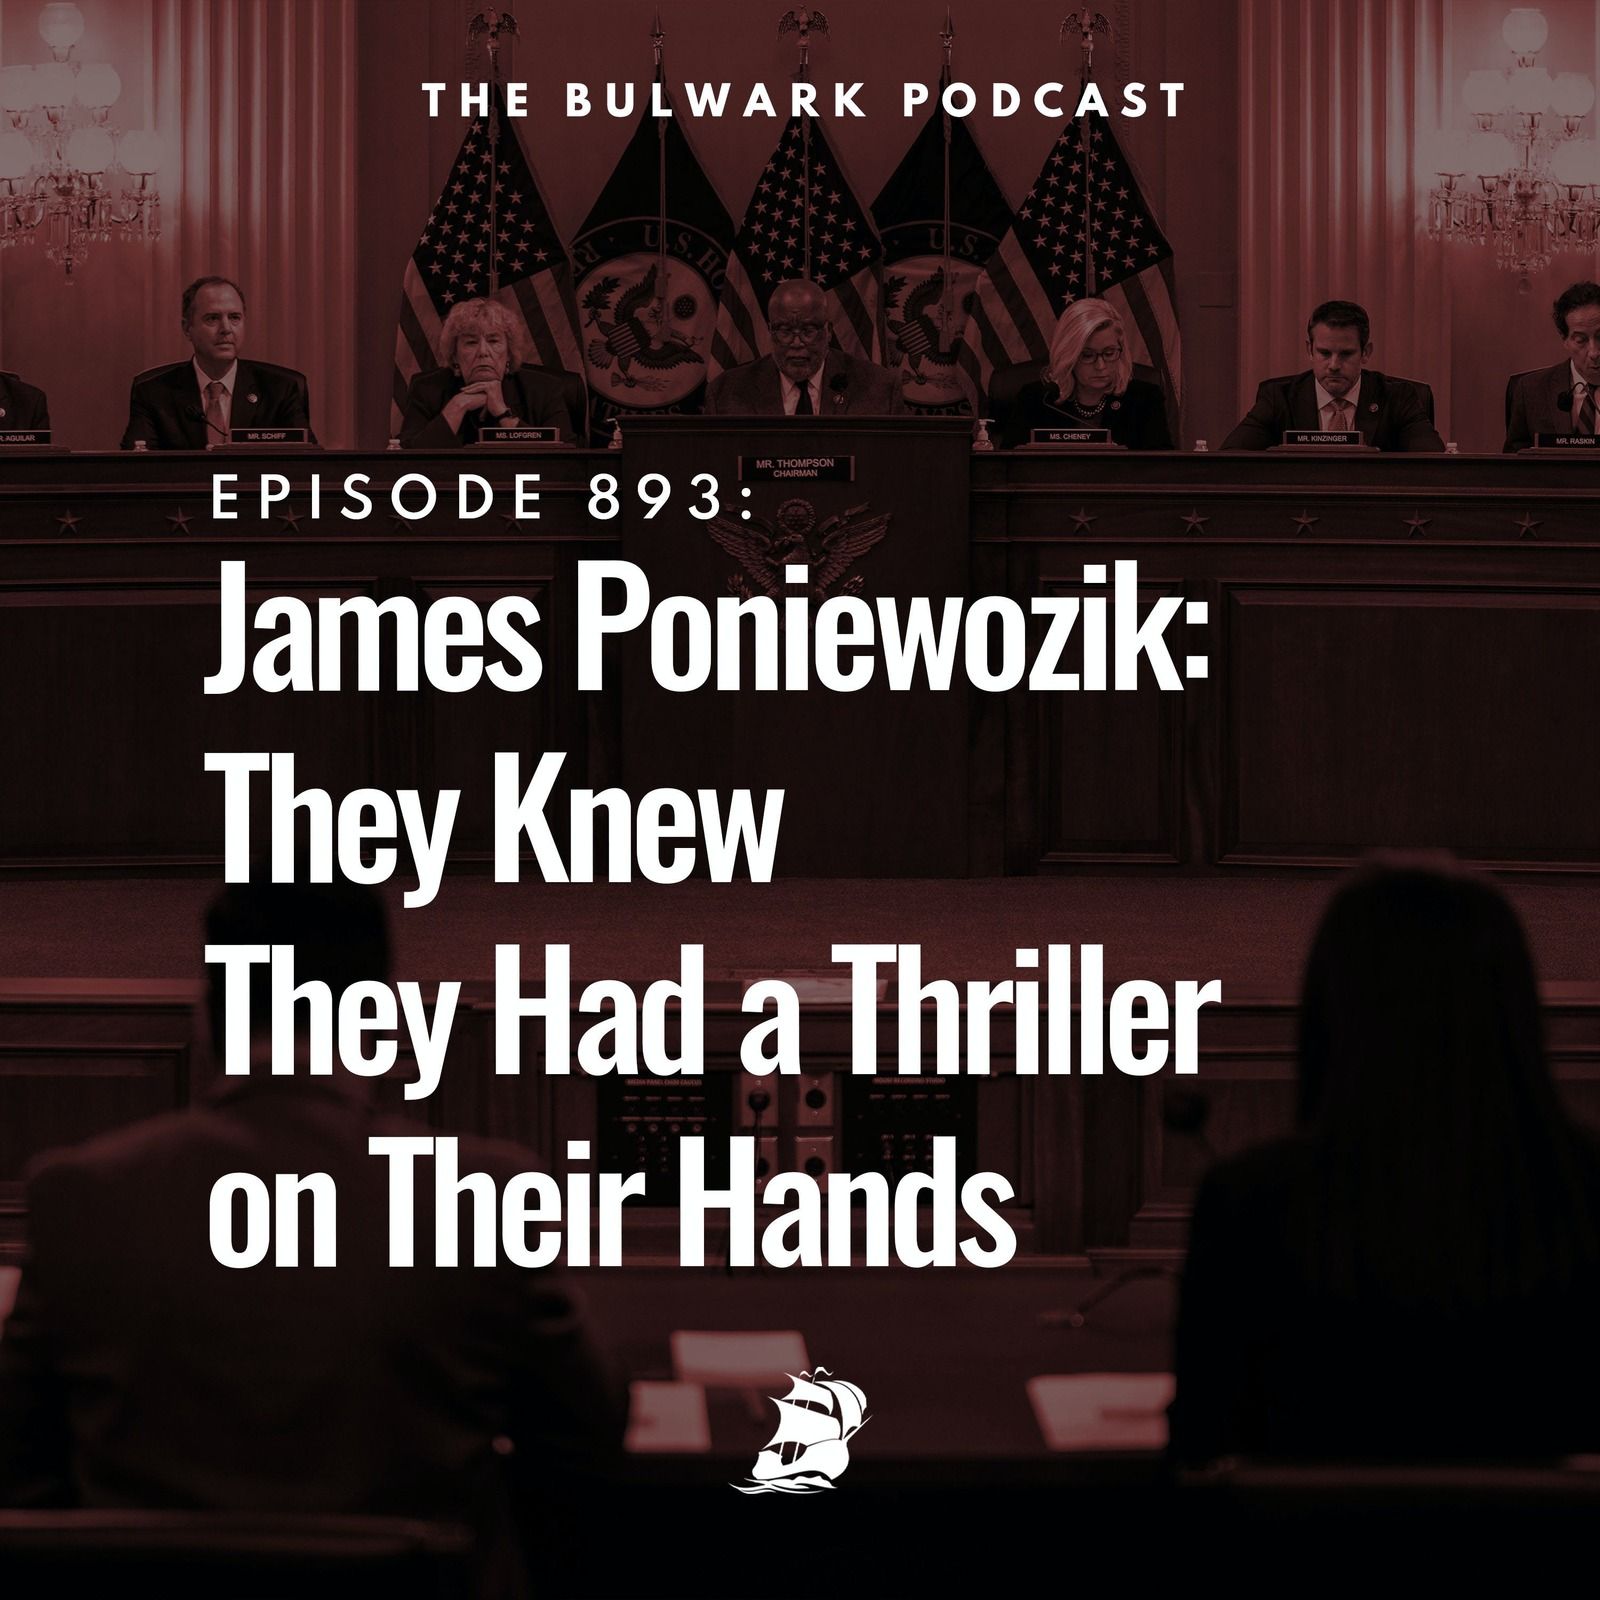 James Poniewozik: They Knew They Had a Thriller on Their Hands